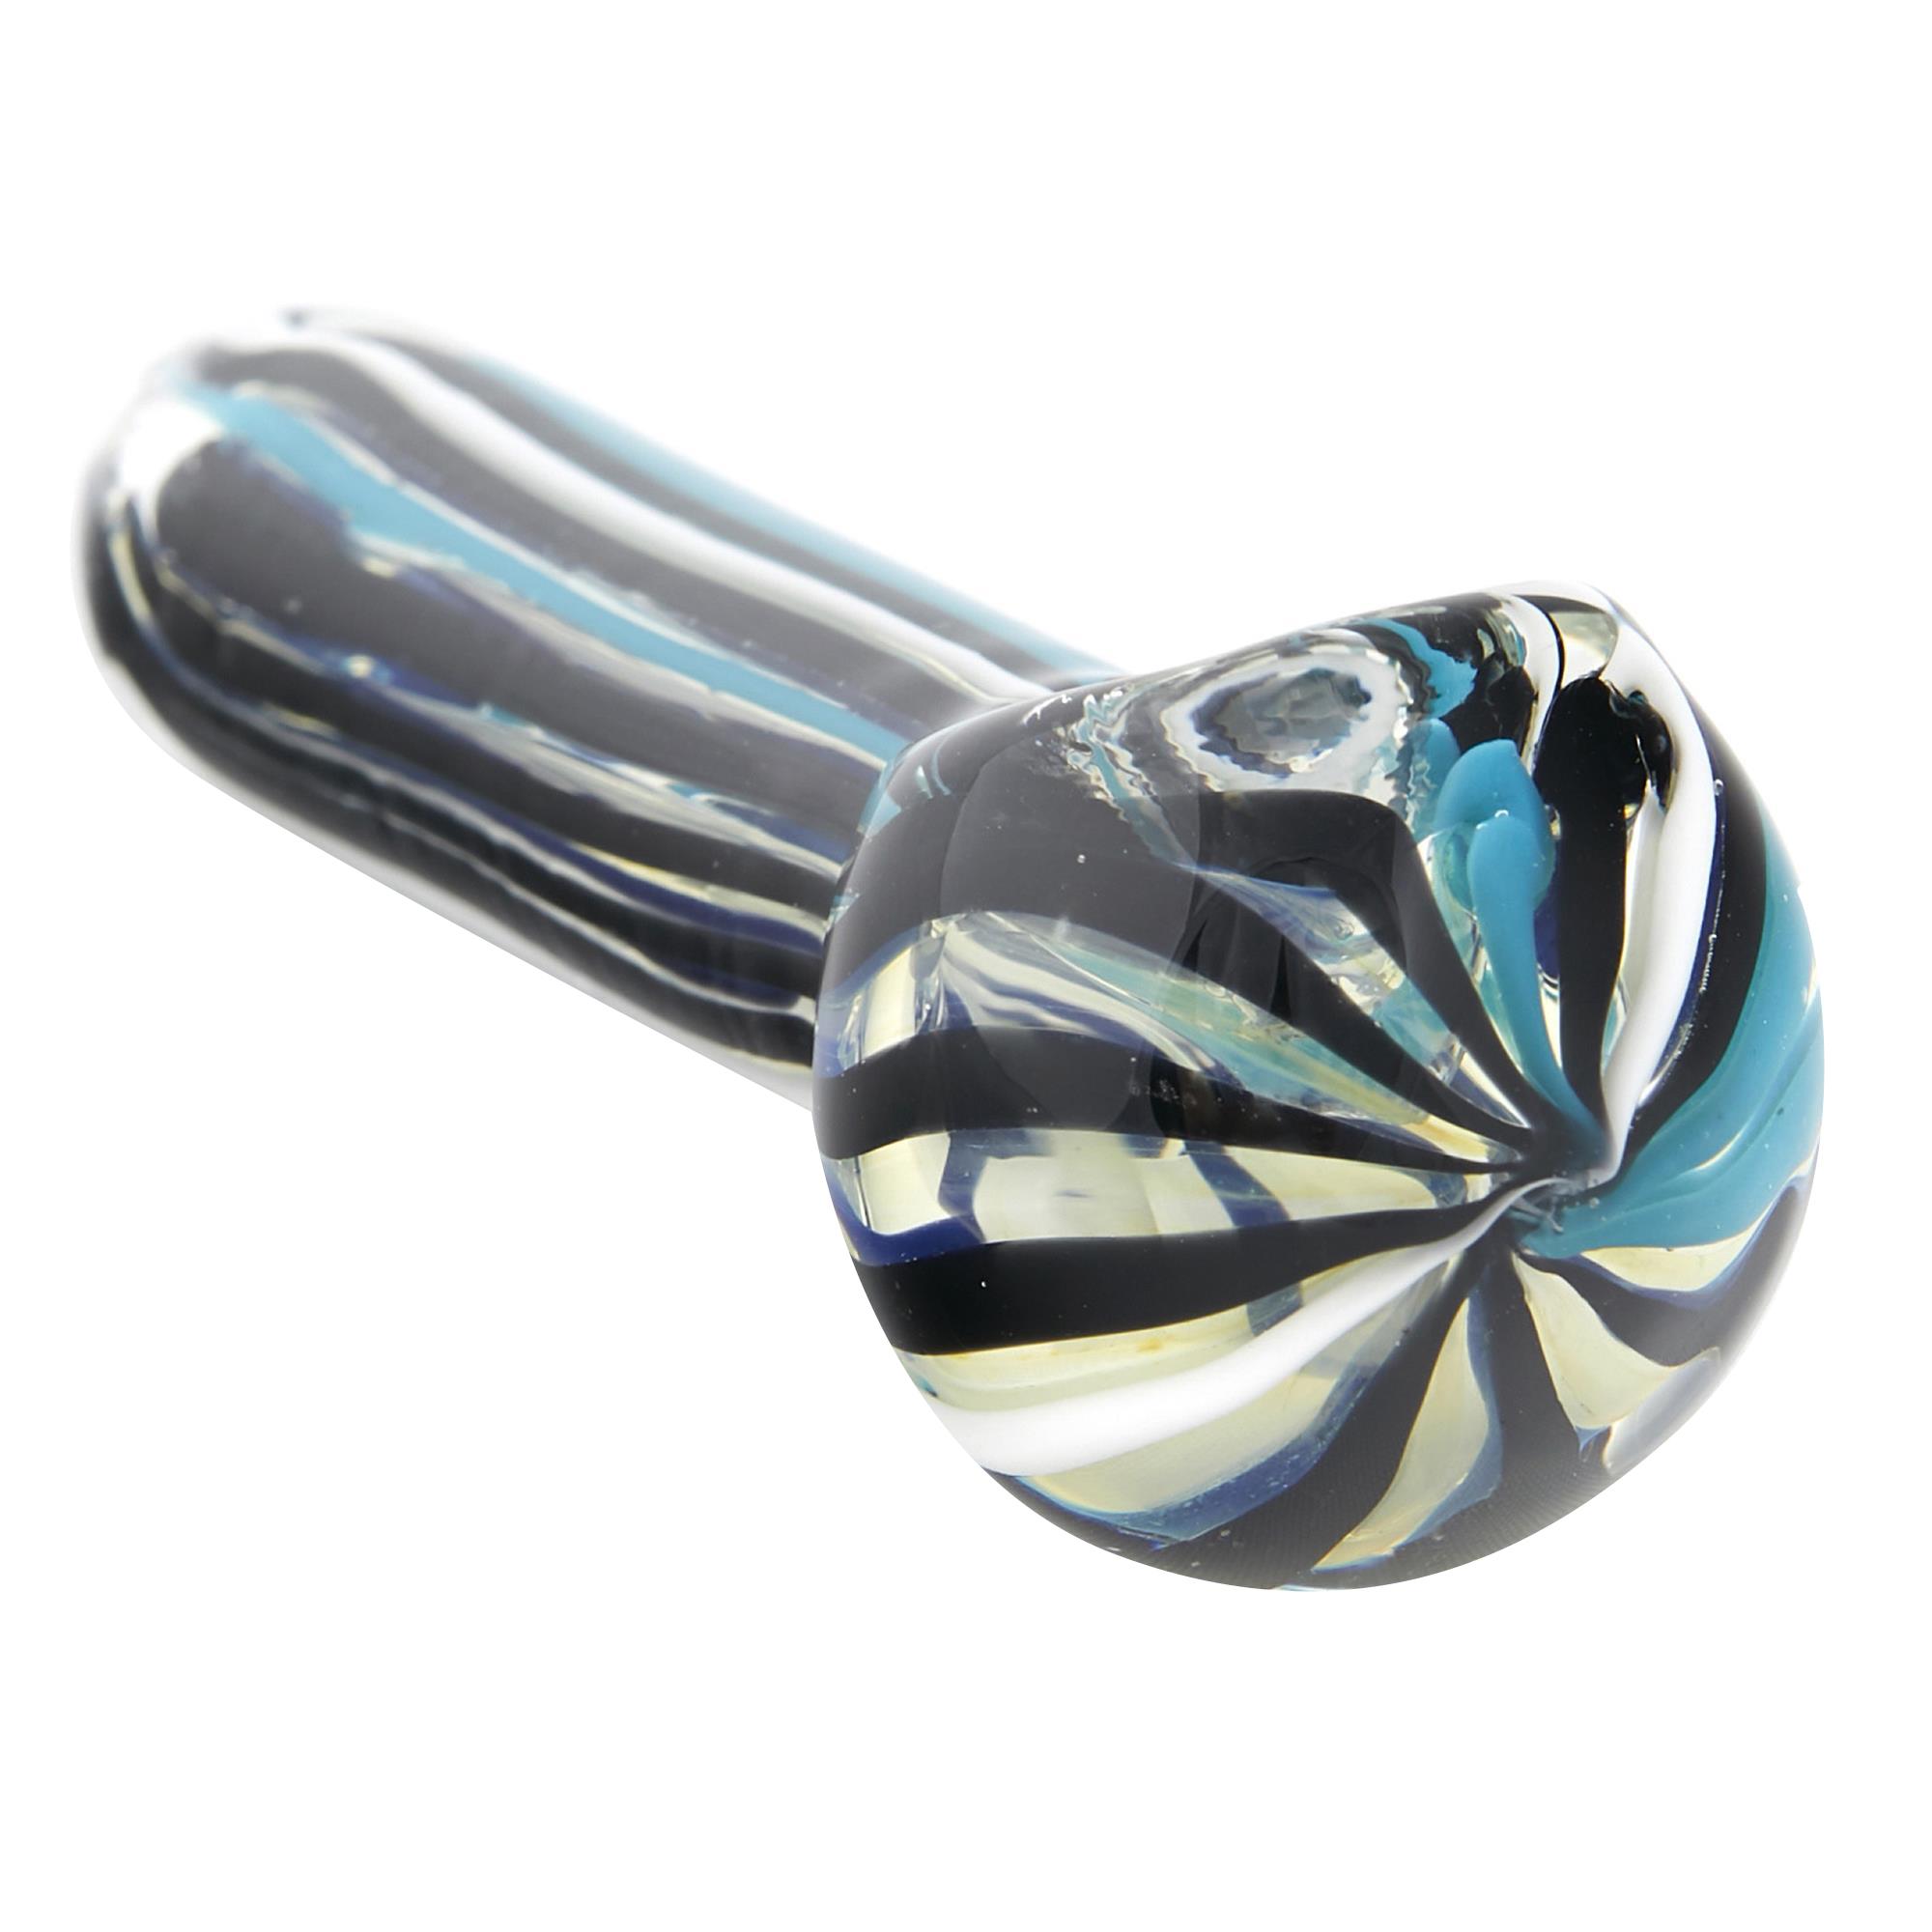 EXTREME HIGH SPOON PIPE